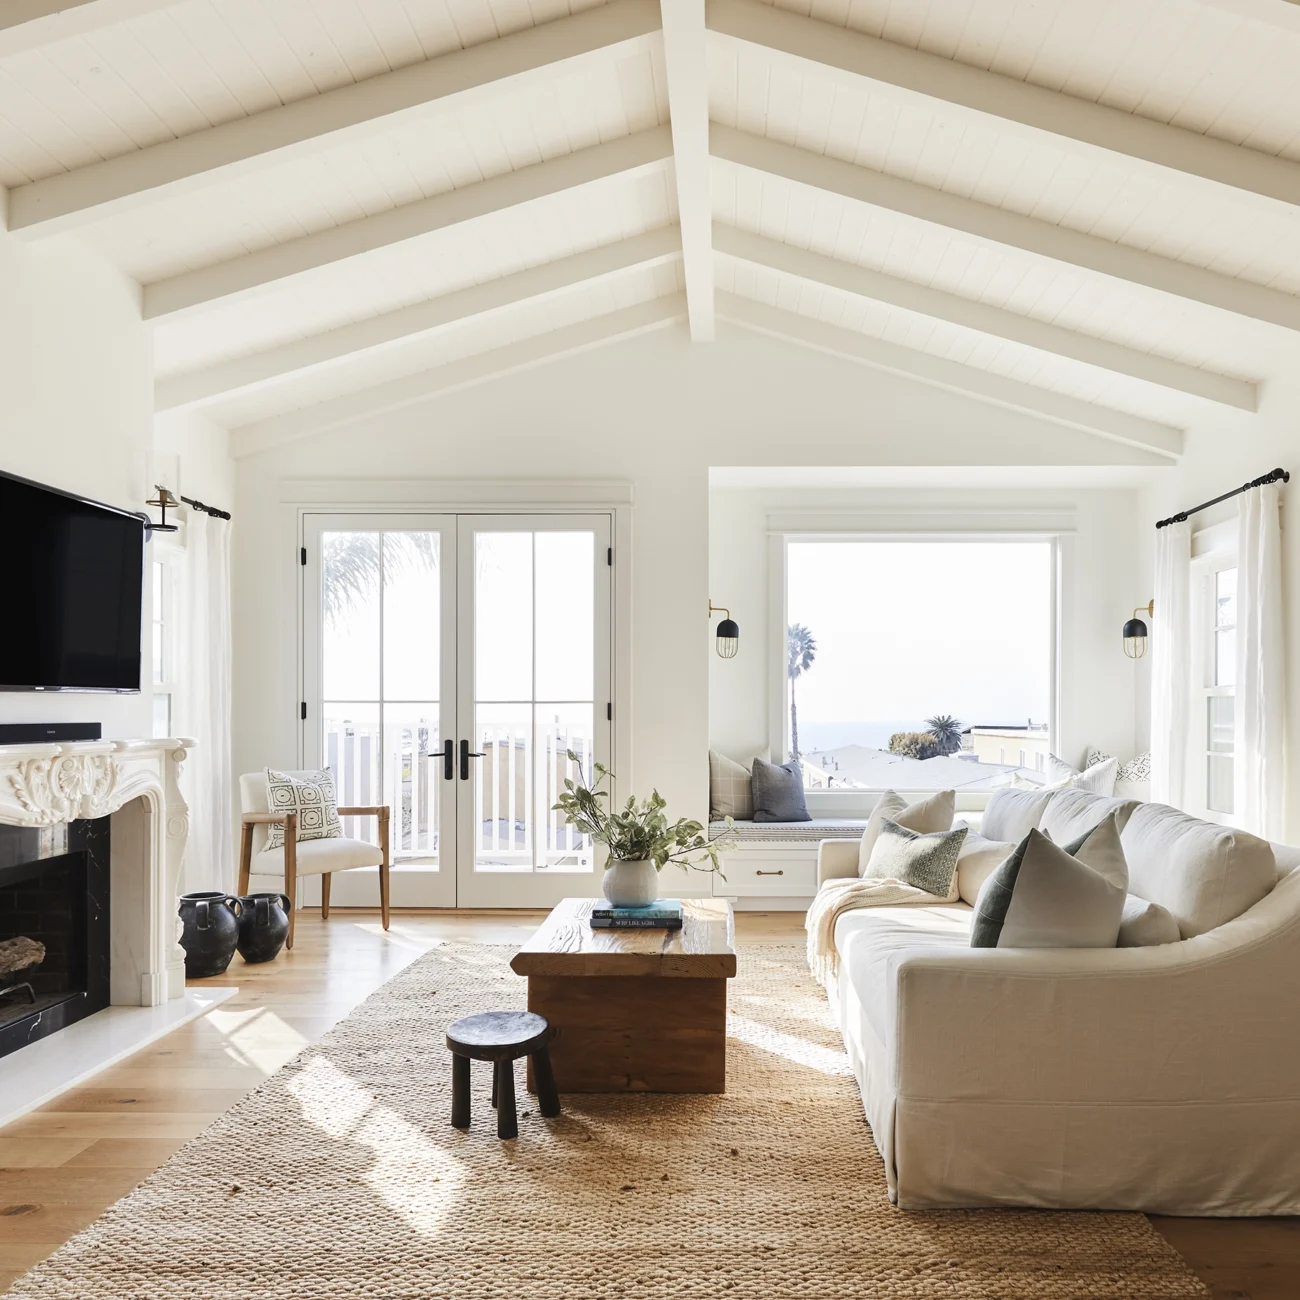 Christine Vroom Interiors | Gentry | Bright, white living room with vaulted ceilings